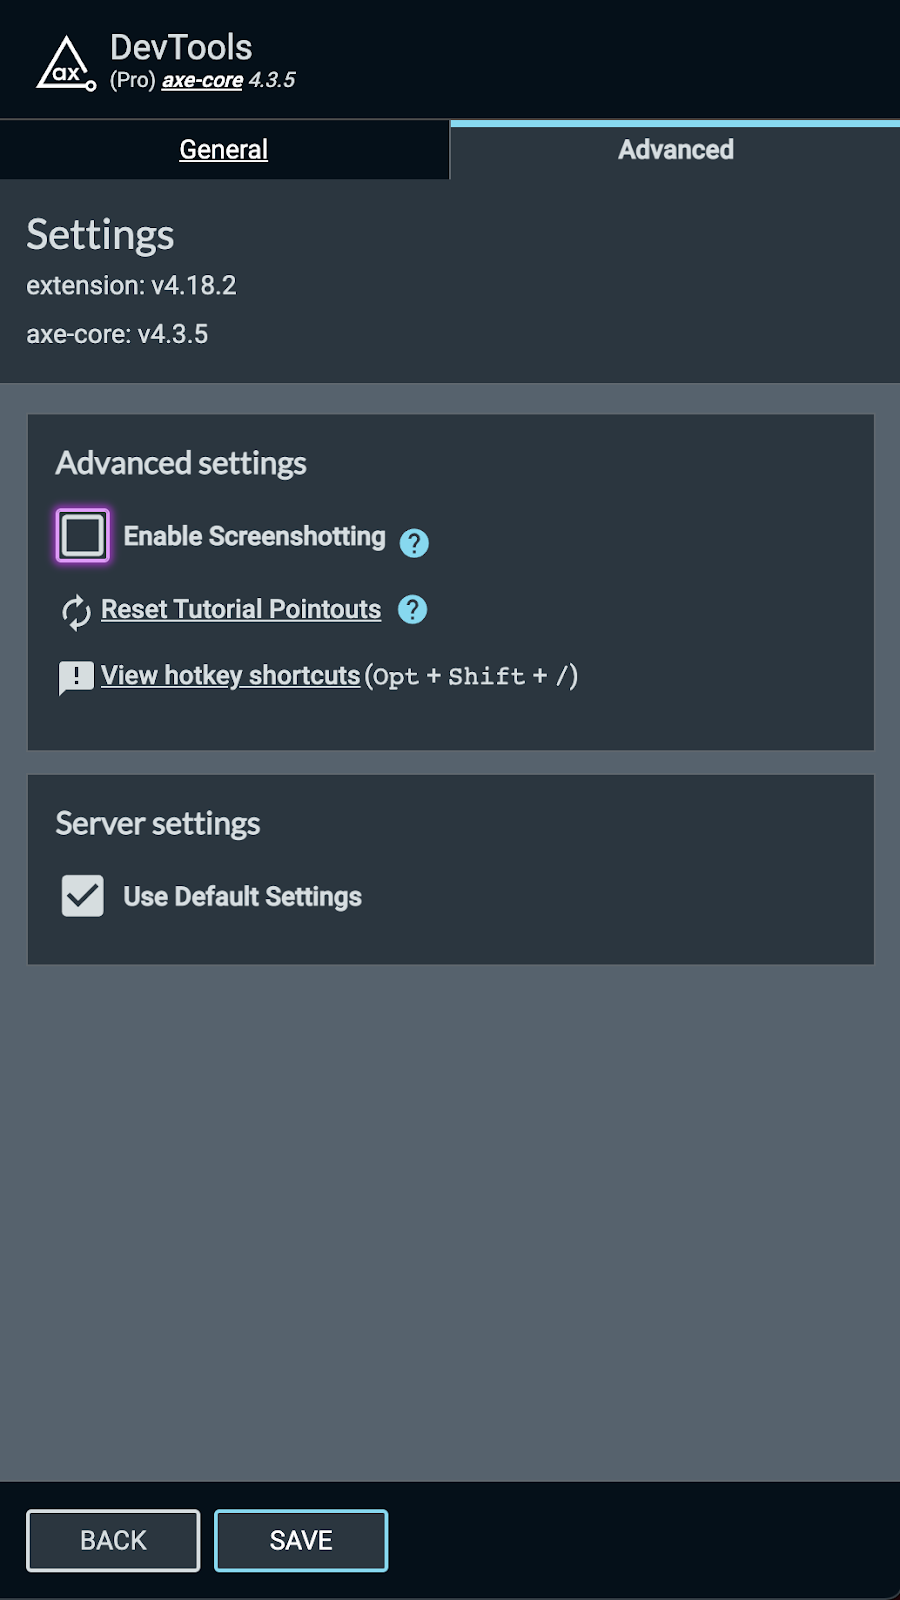 Screenshot of the Advanced Setting option where you can Enable/Disable Screenshotting functionality in the axe DevTools